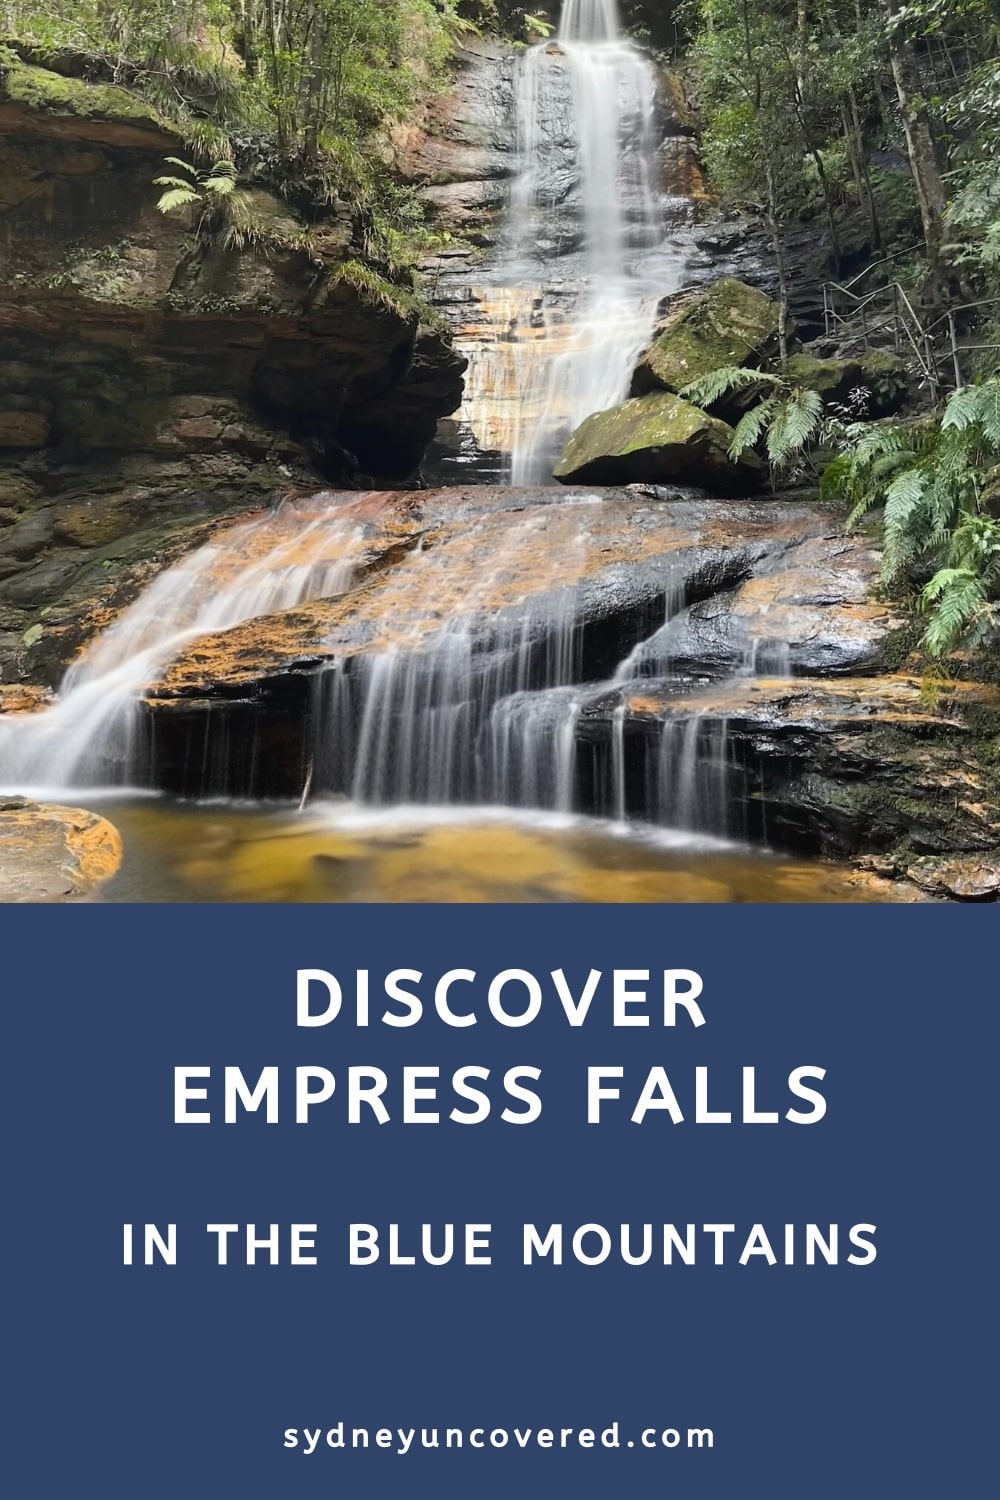 Discover Empress Falls in the Blue Mountains